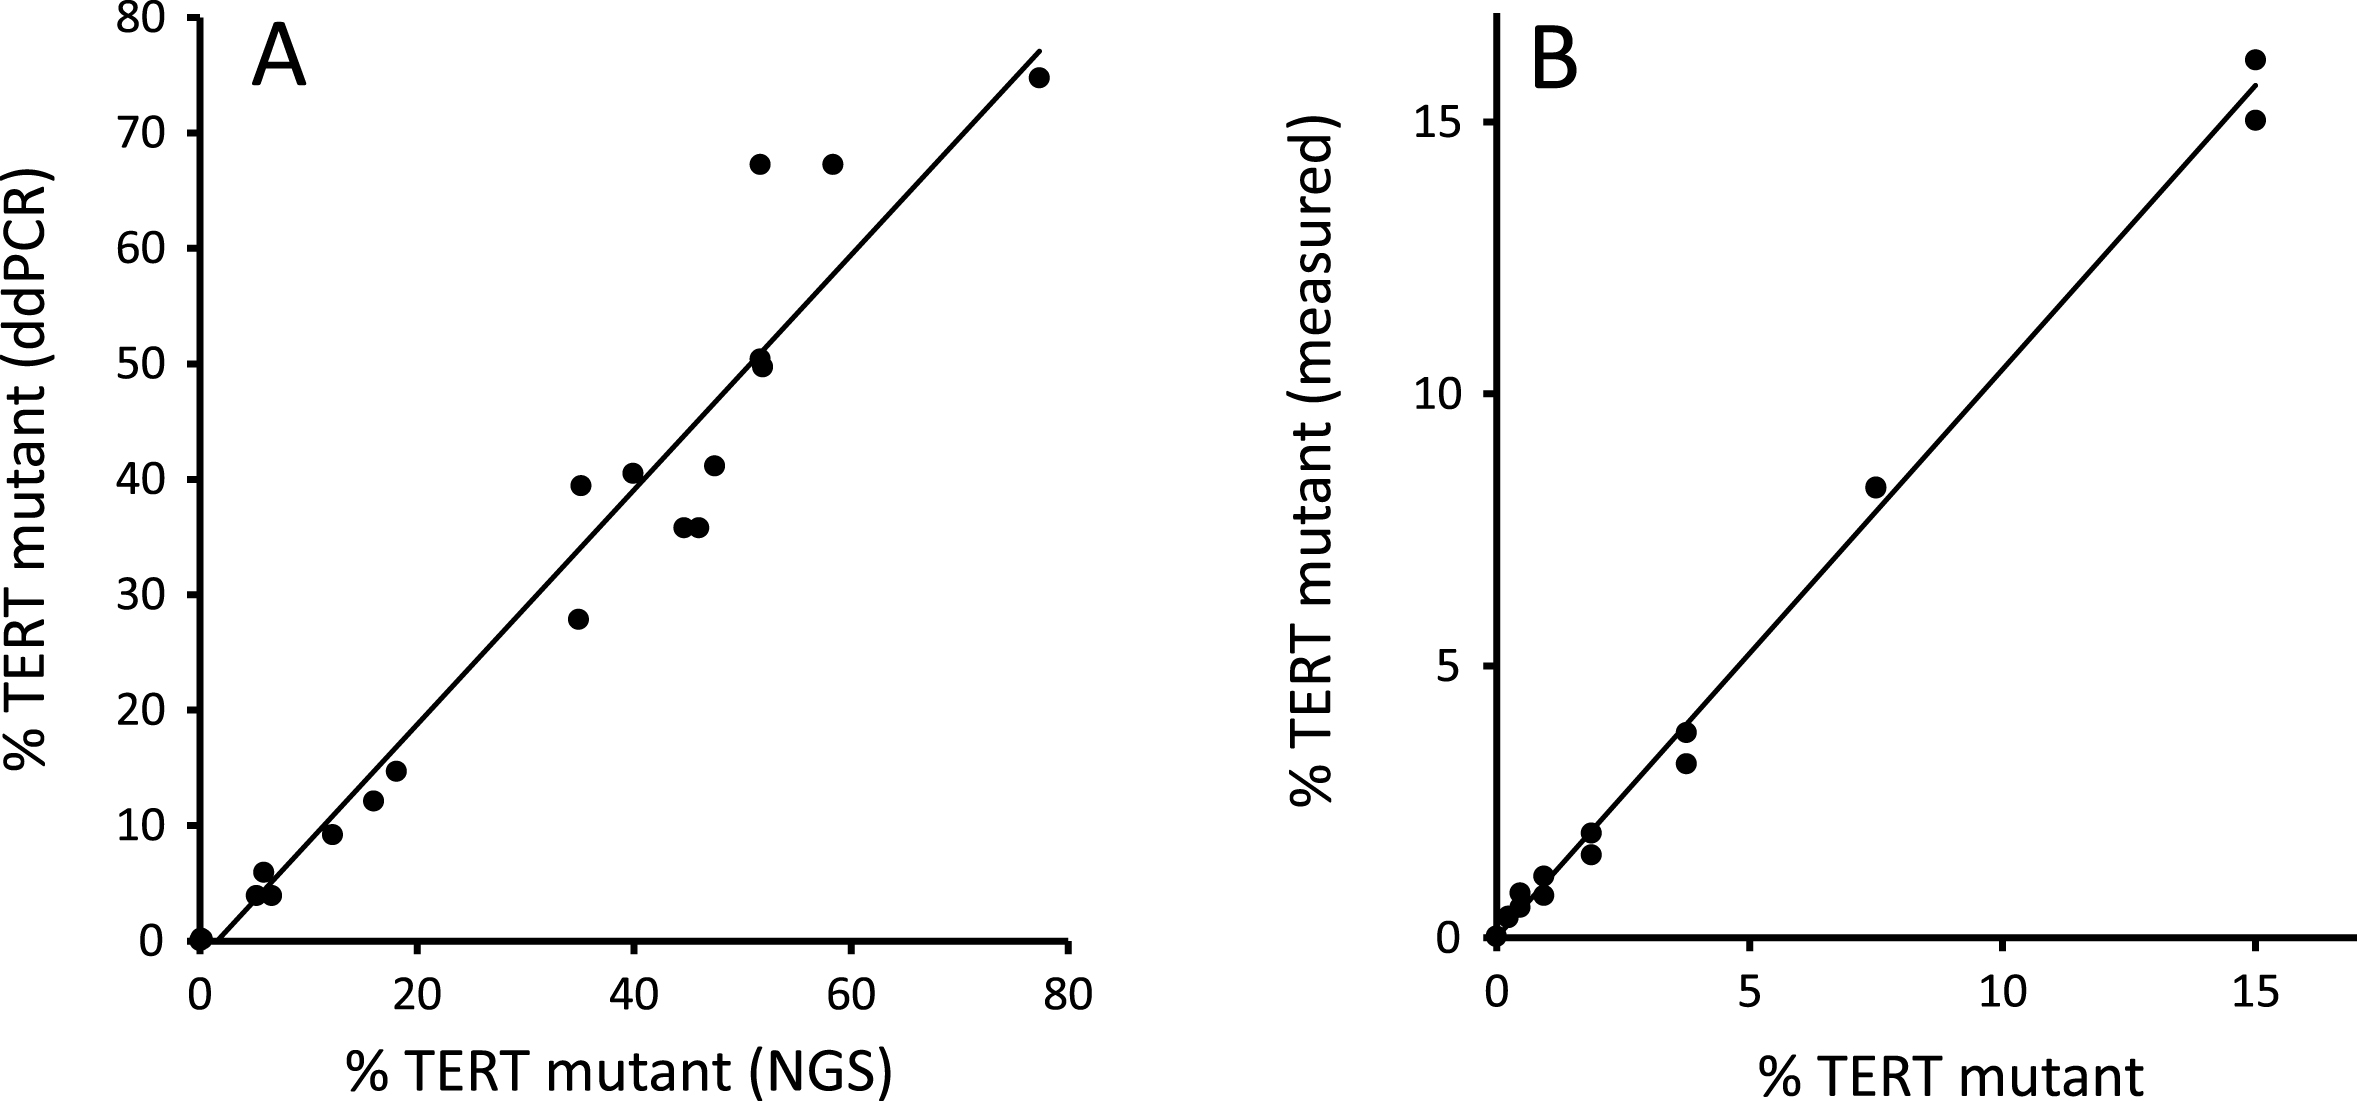 ddPCR validation. Figure 1(A) shows the TERT 228 G>A/T mutant allele frequency in DNA extracted from 21 fresh-frozen bladder tumours measured by ddPCR and NGS. Figure 1(B) shows ddPCR analysis of a 2-fold serial dilution of pooled TERT mutant tumour DNA (15% mutant by NGS) diluted in pooled TERT wt tumour DNA.